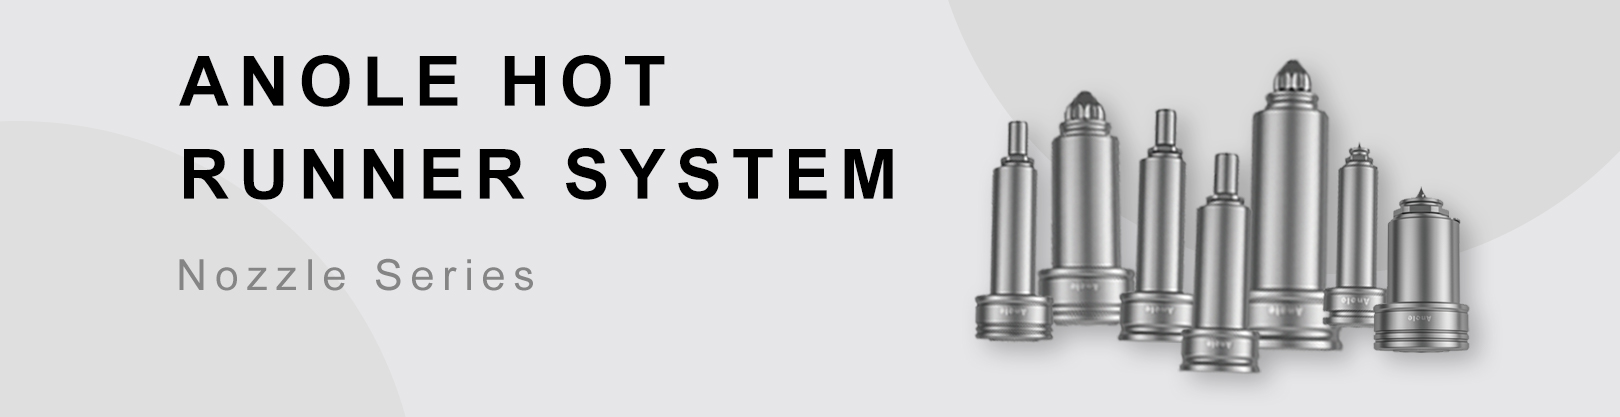 Hot Runner-Nozzle Series System